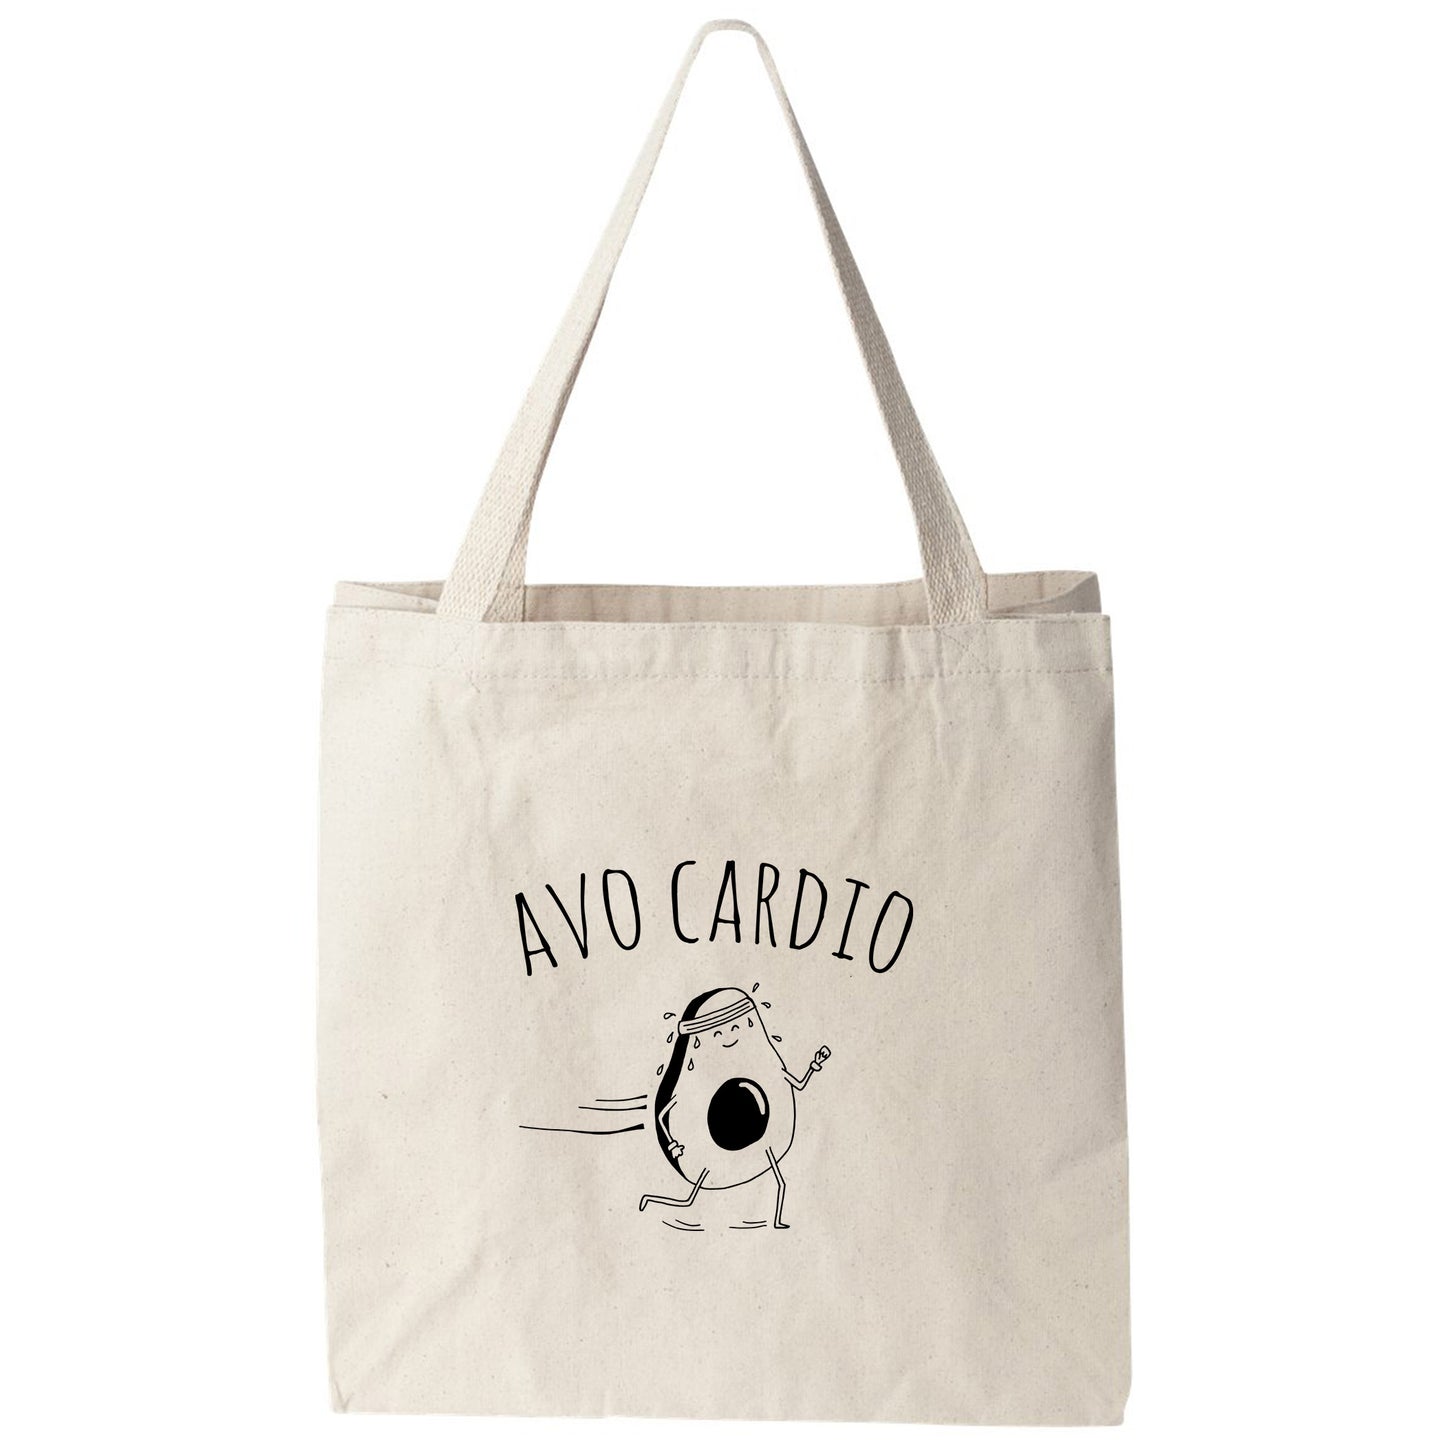 a tote bag with a cartoon character on it